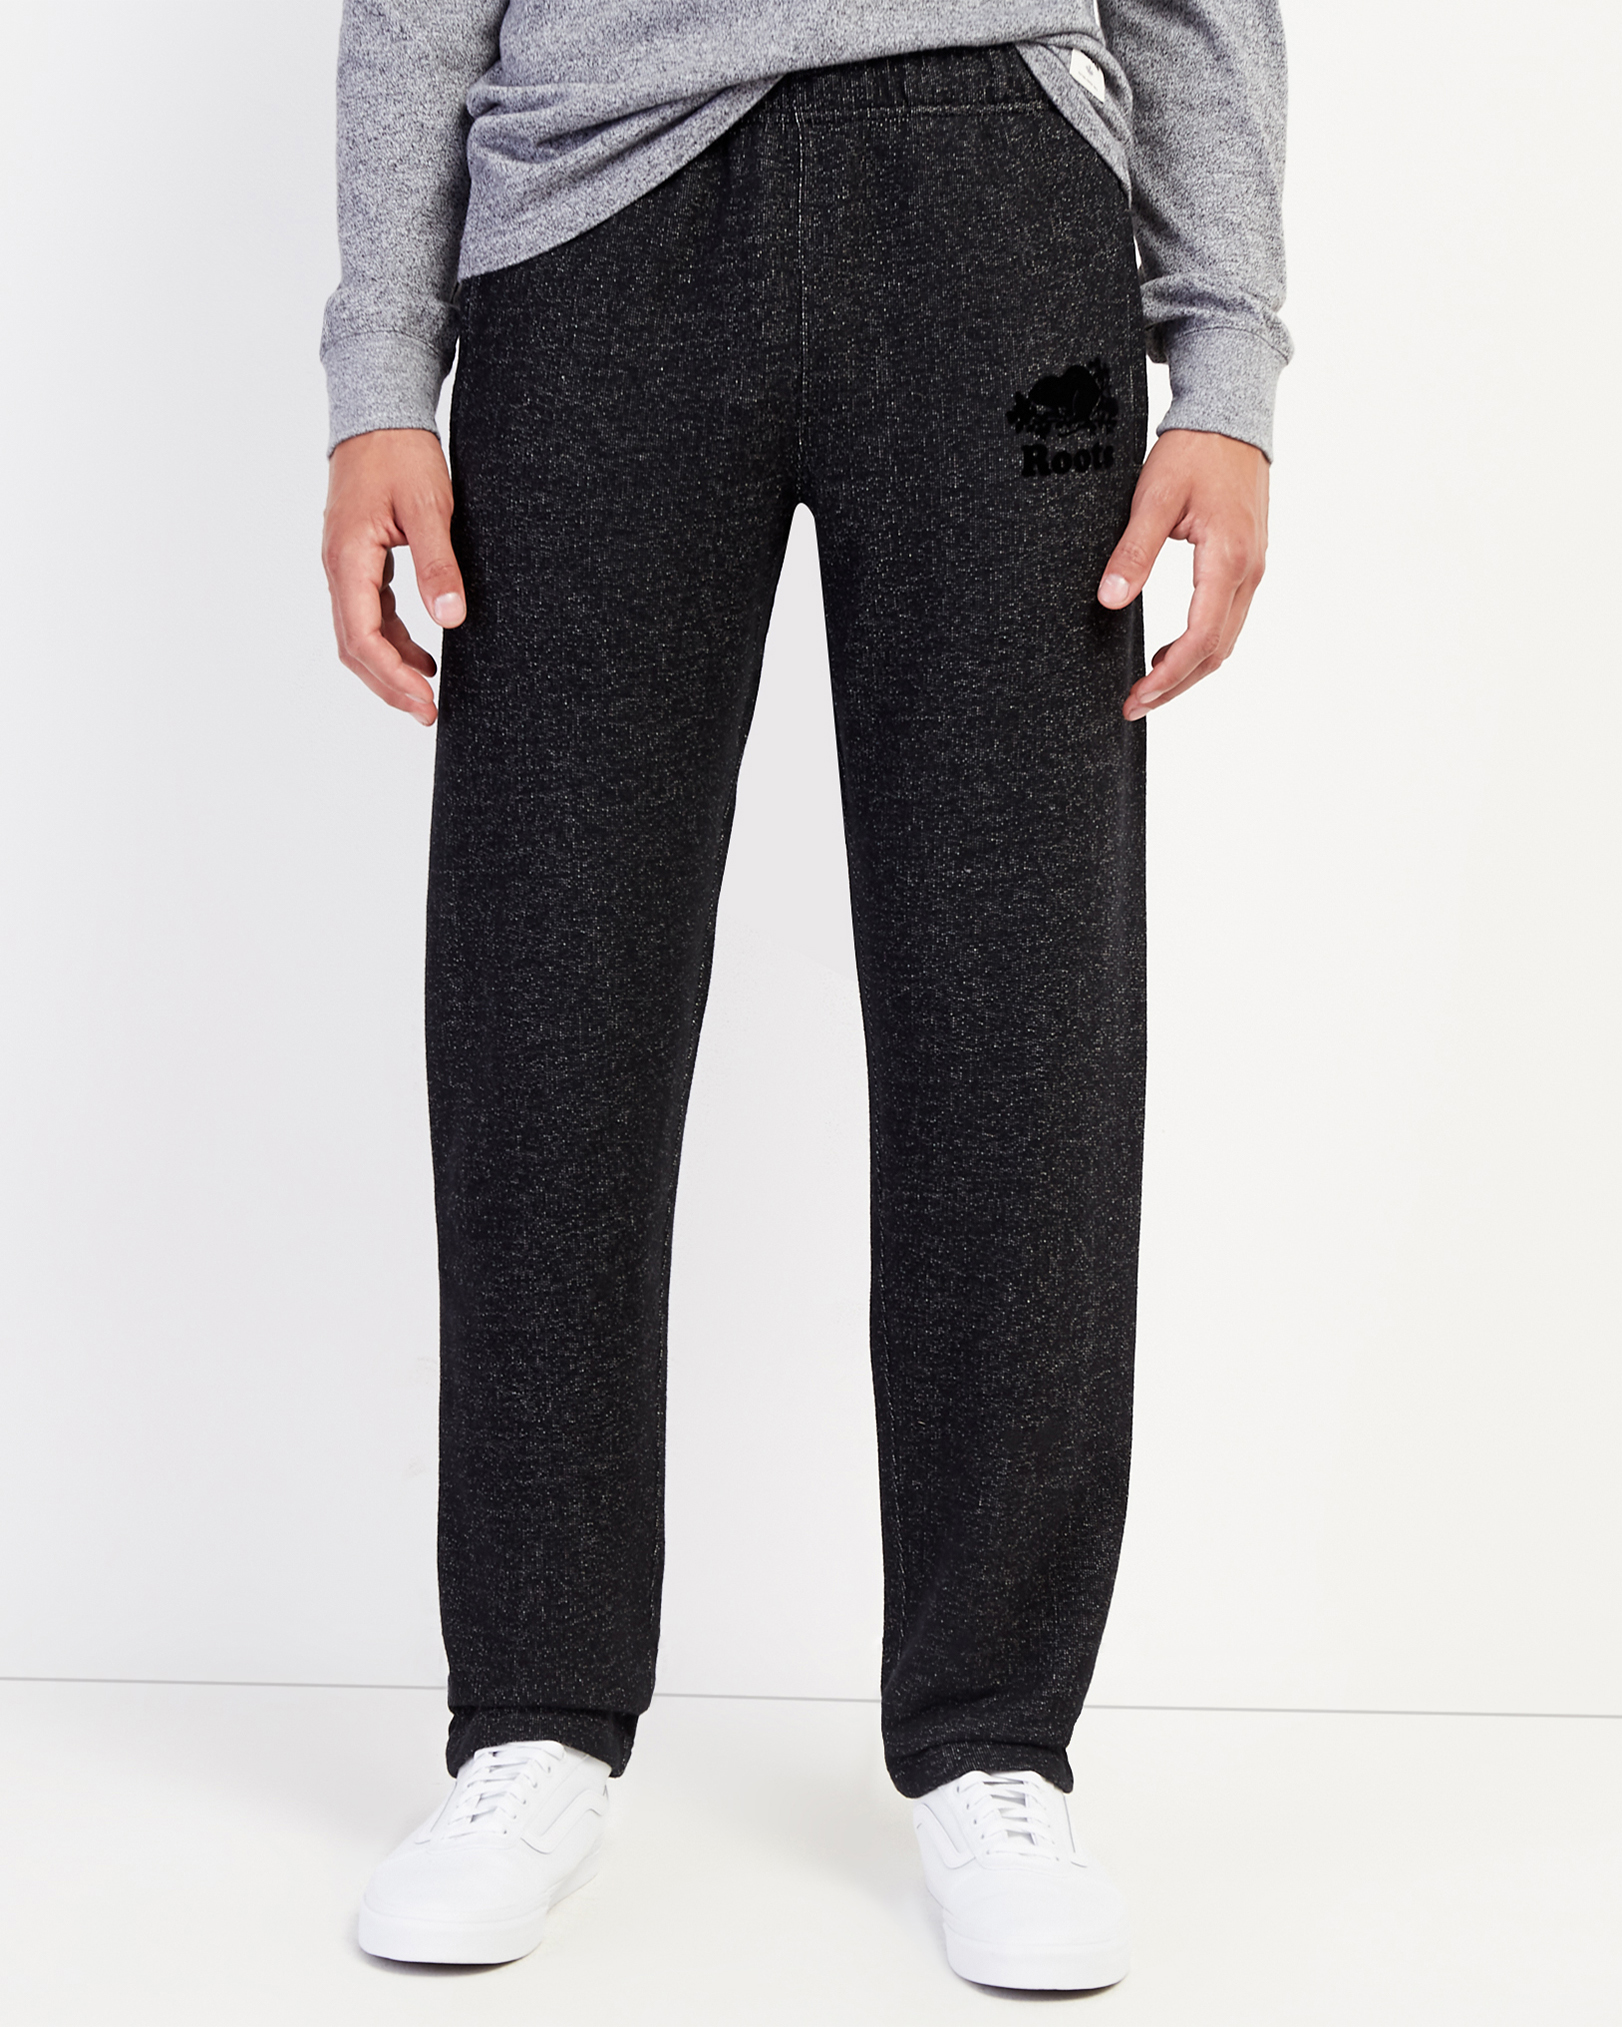 Roots Heritage Sweatpant in Black Pepper